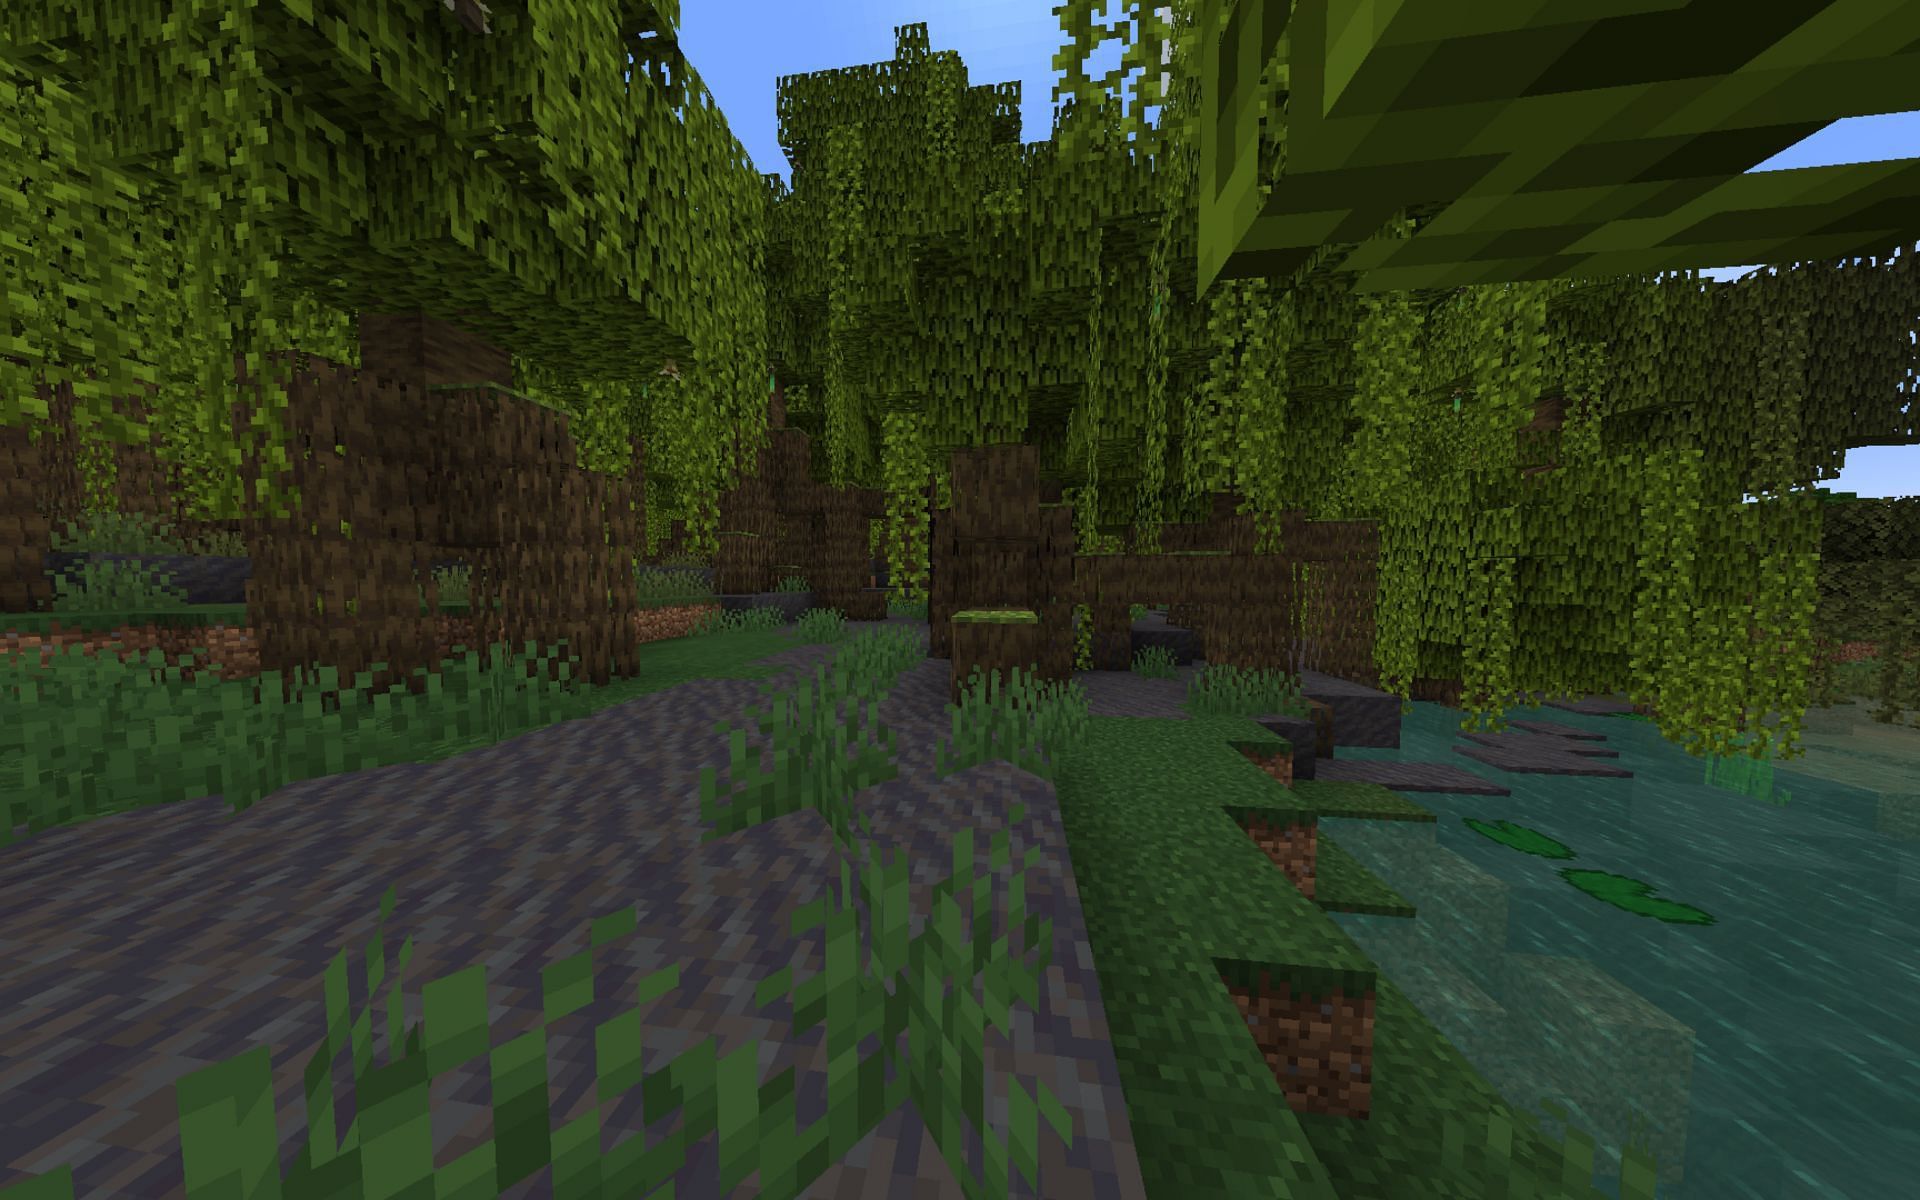 The Mangrove biome the player spawns in (Image via Minecraft)